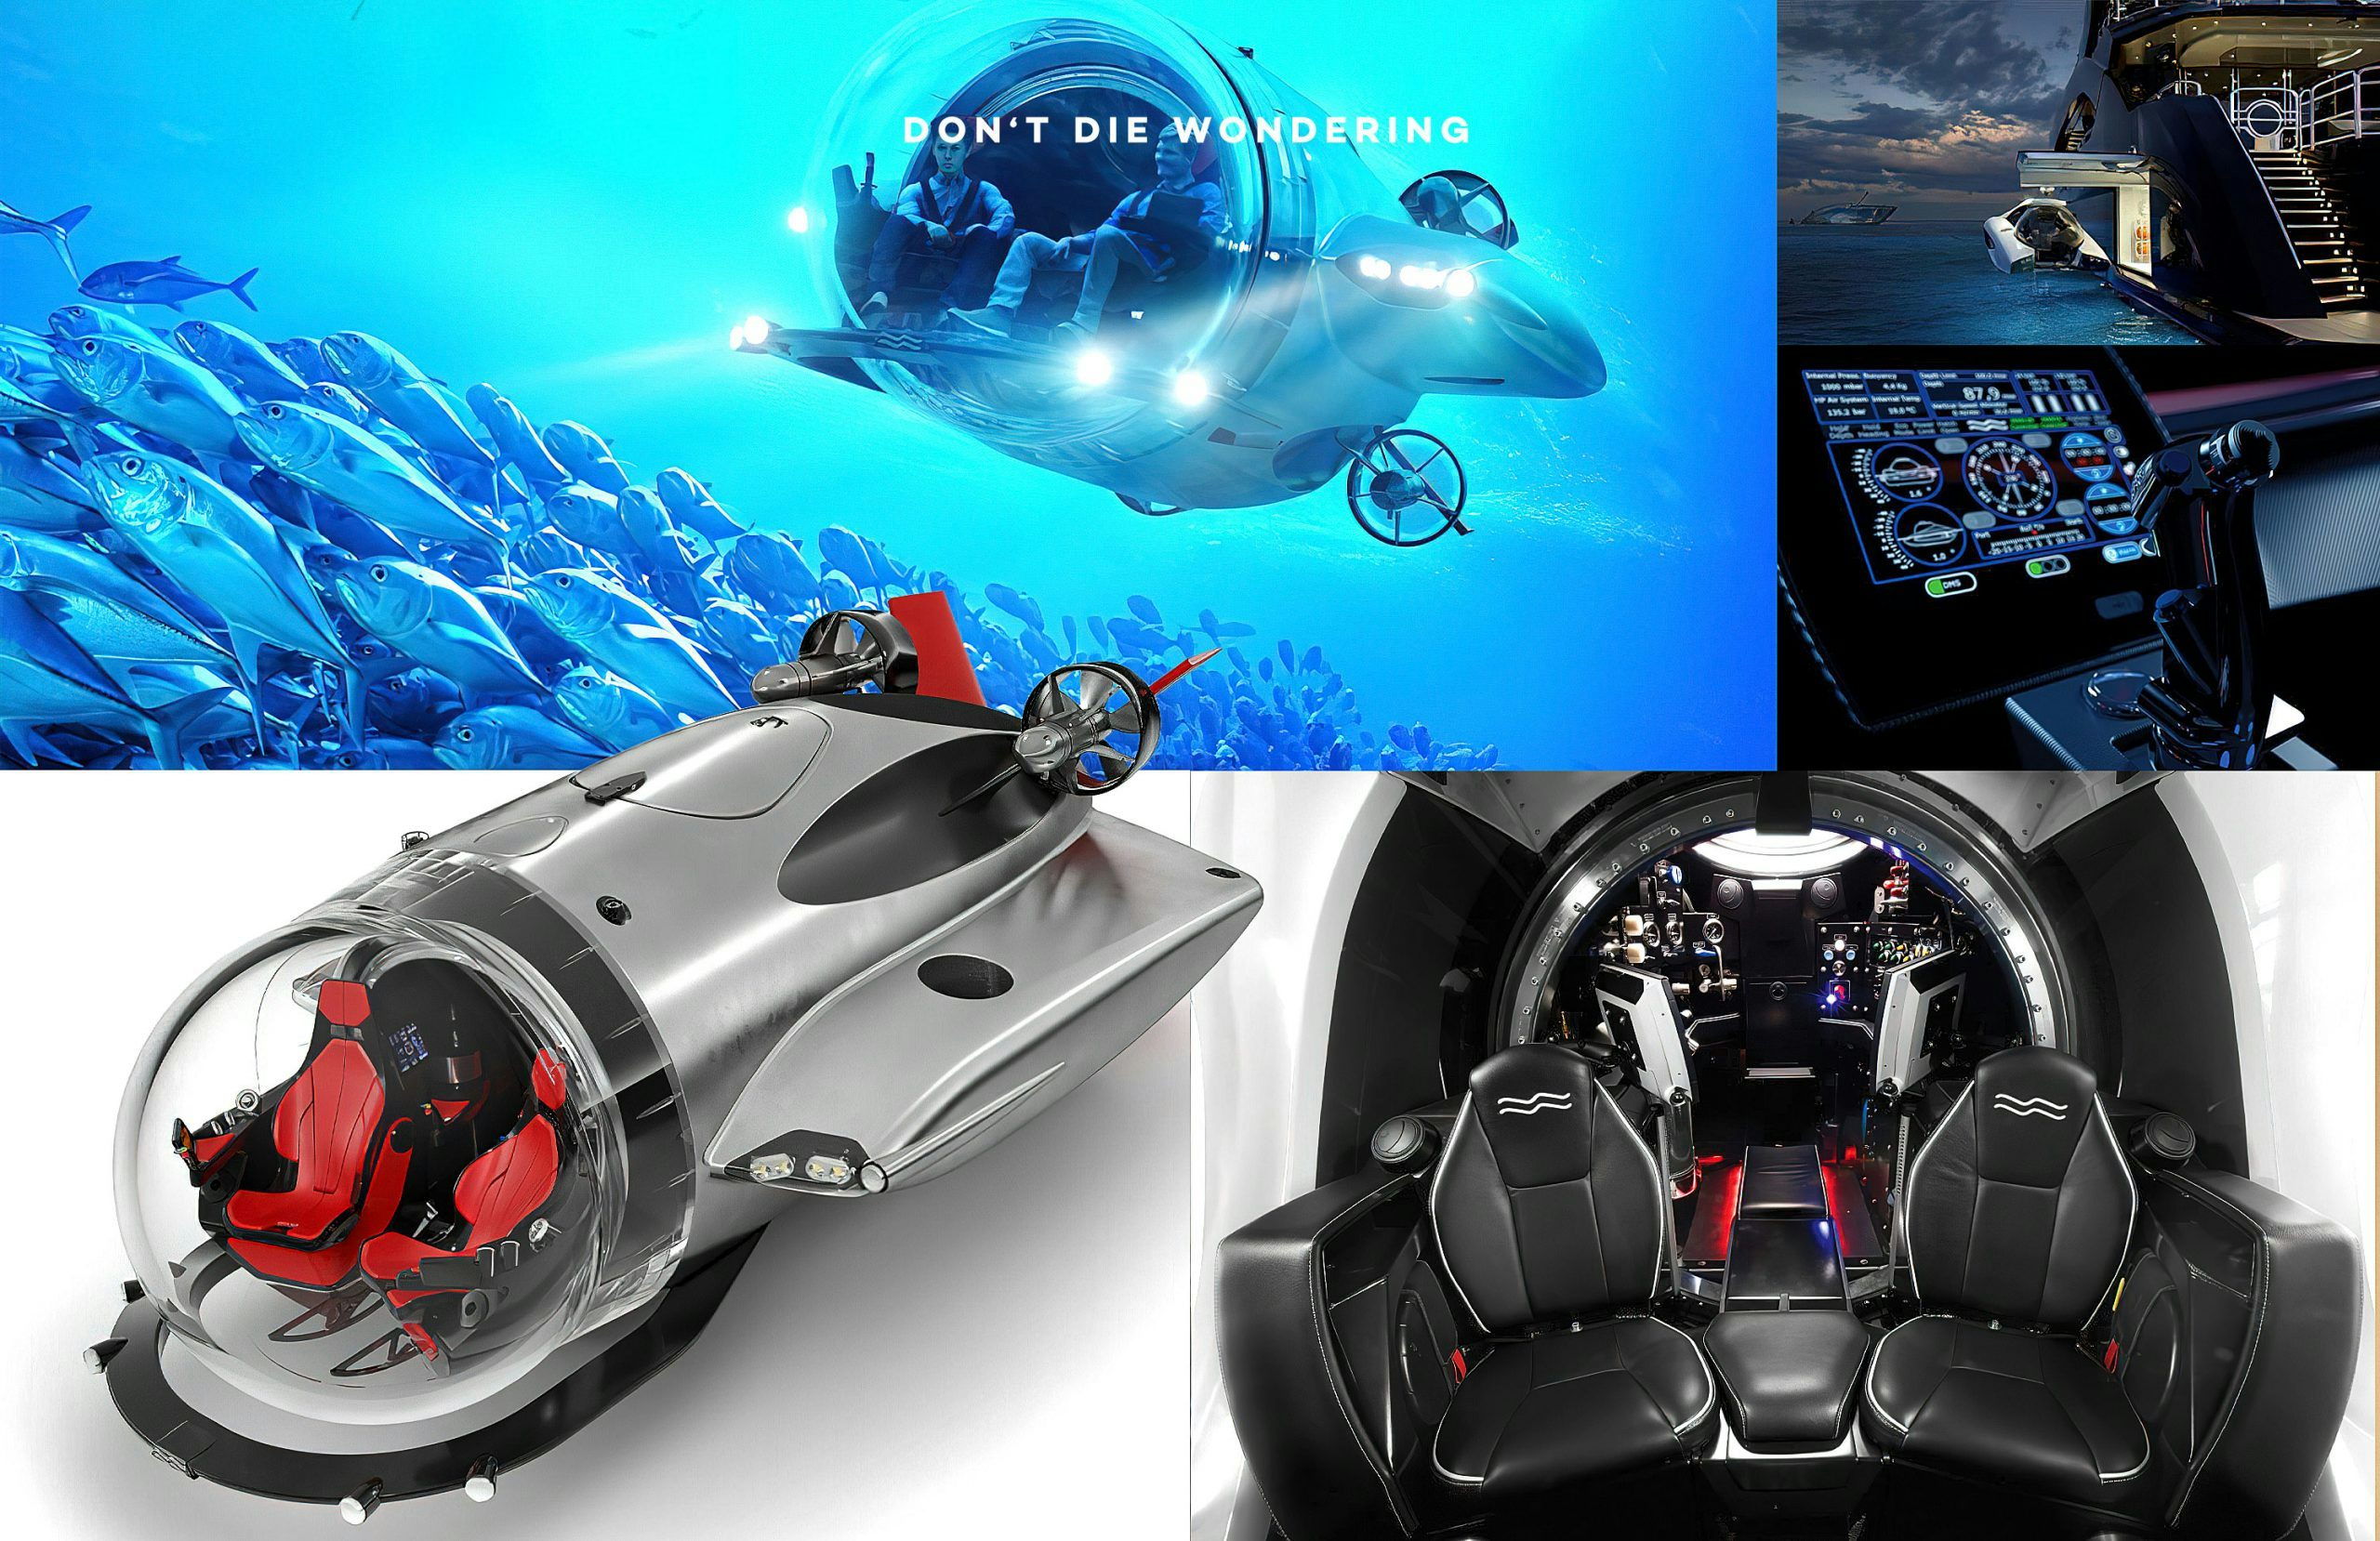 Submerge Yourself In This Superyacht Gadget Valued At Over $5 Million